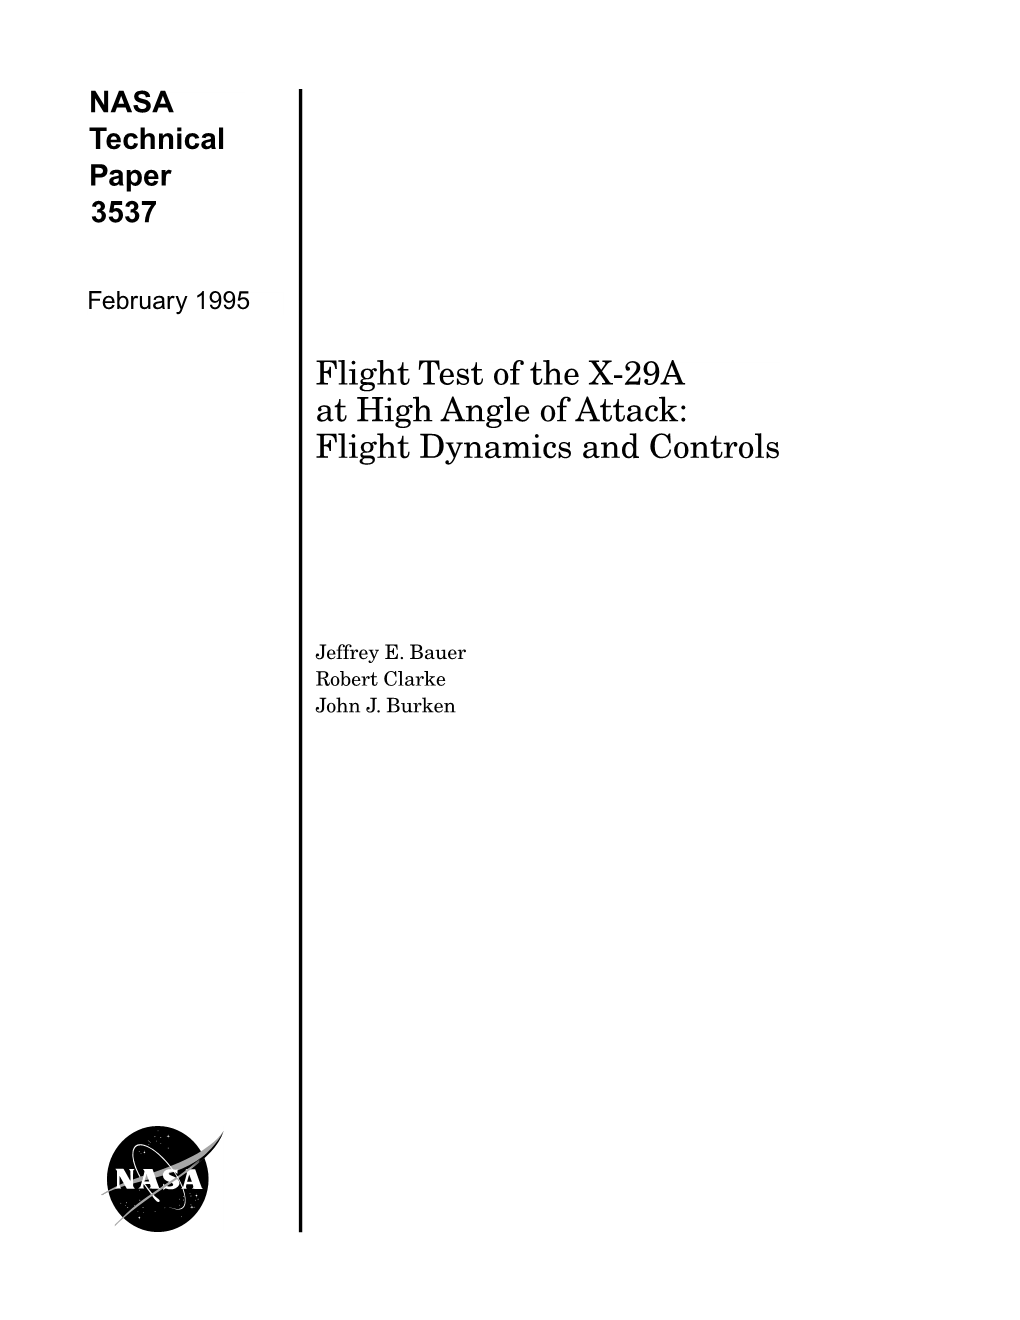 Flight Test of the X-29A at High Angle of Attack: Flight Dynamics and Controls